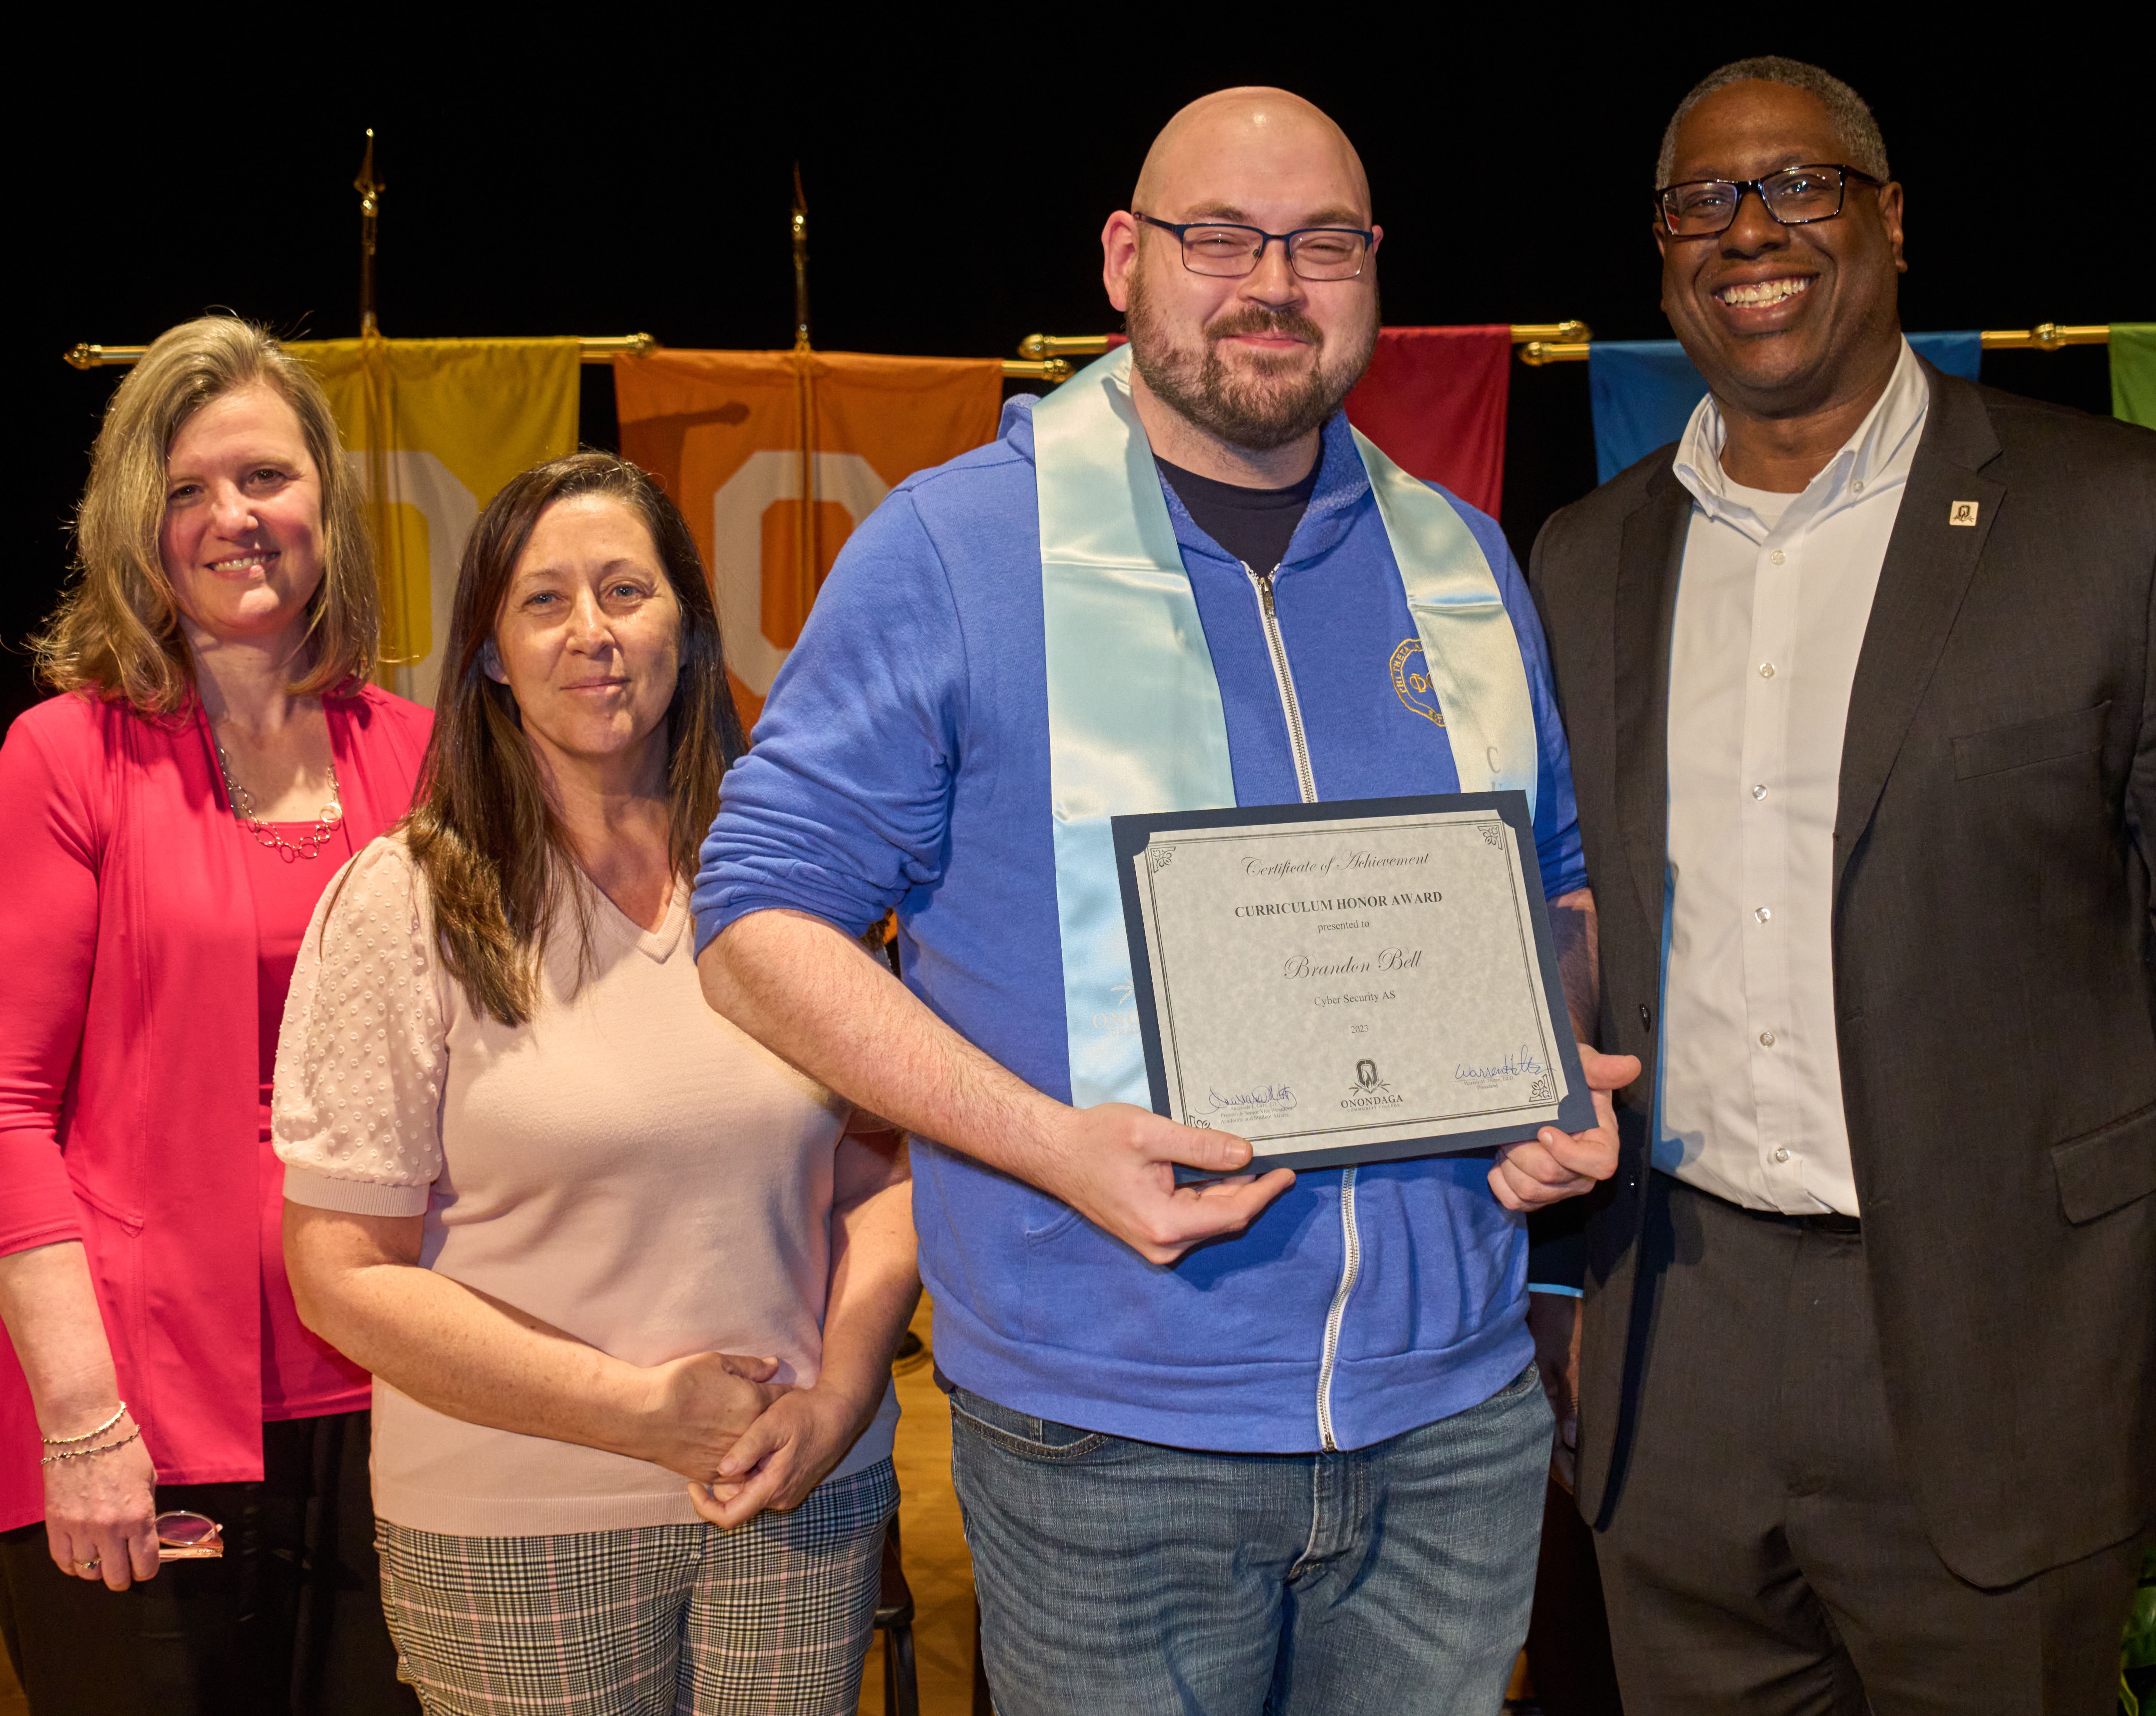 Brandon Bell, Curriculum Honoree for Cyber Security